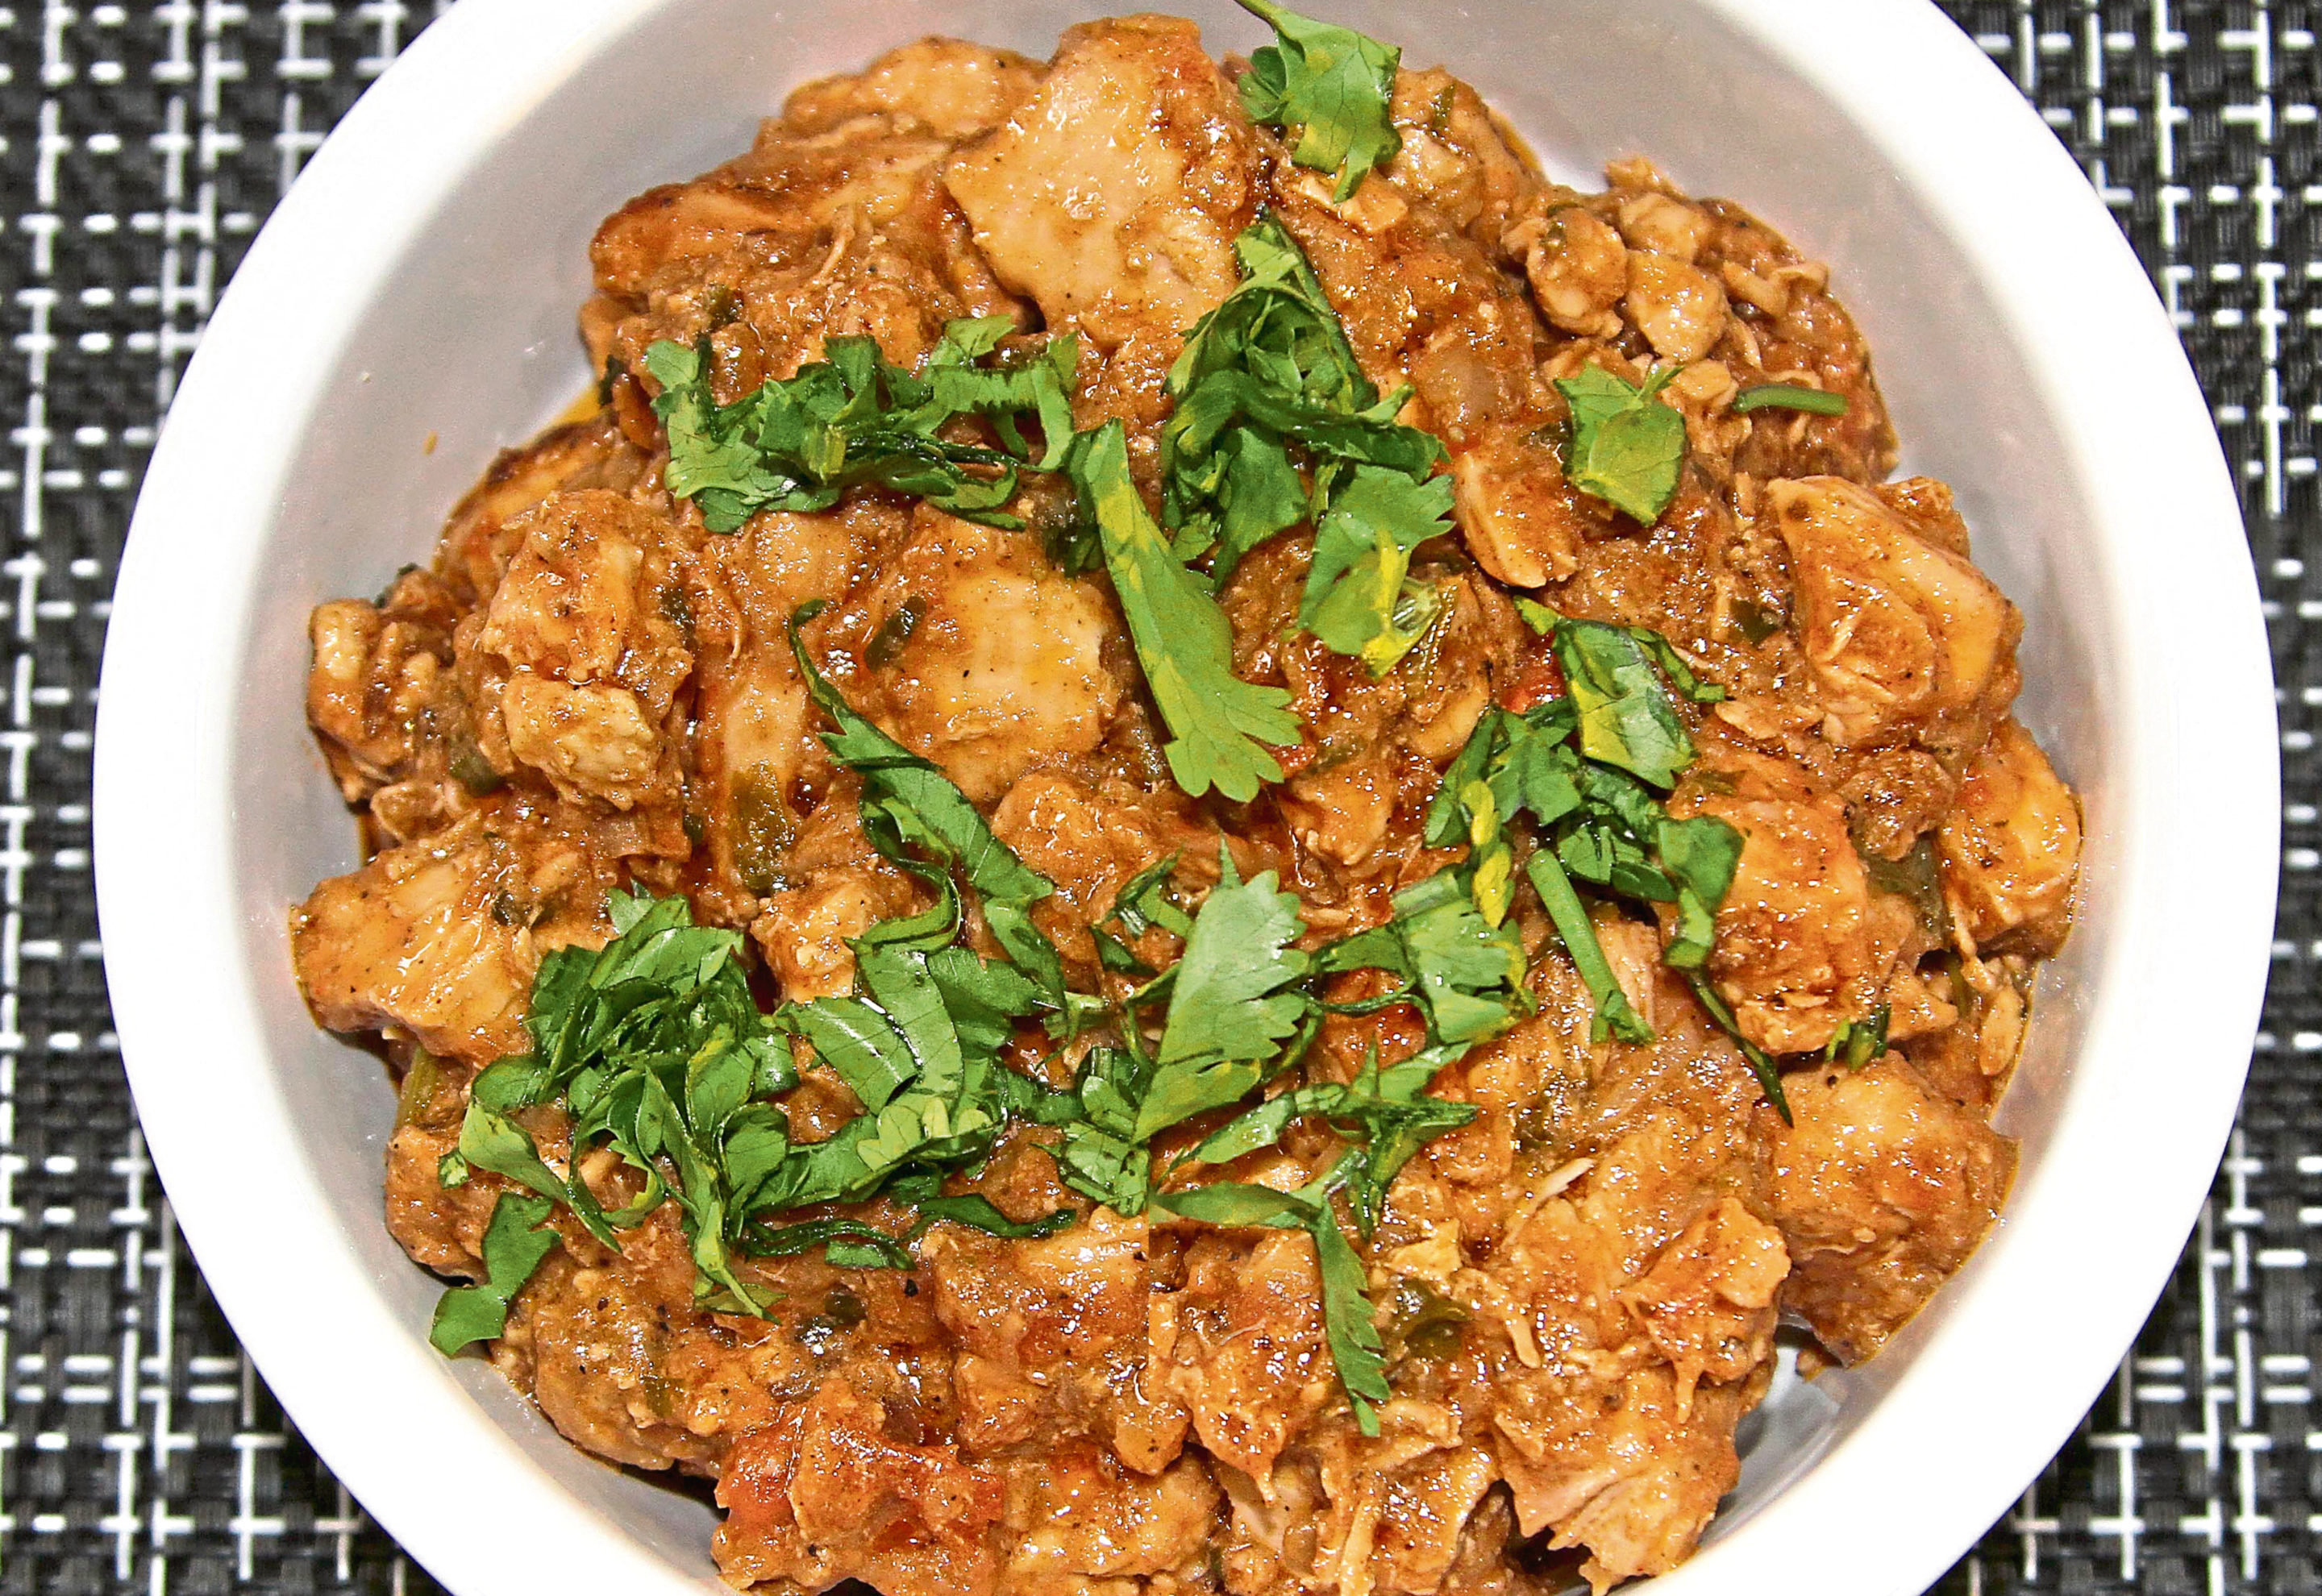 This delicious recipe is from Curry in a Hurry by Farida Khan